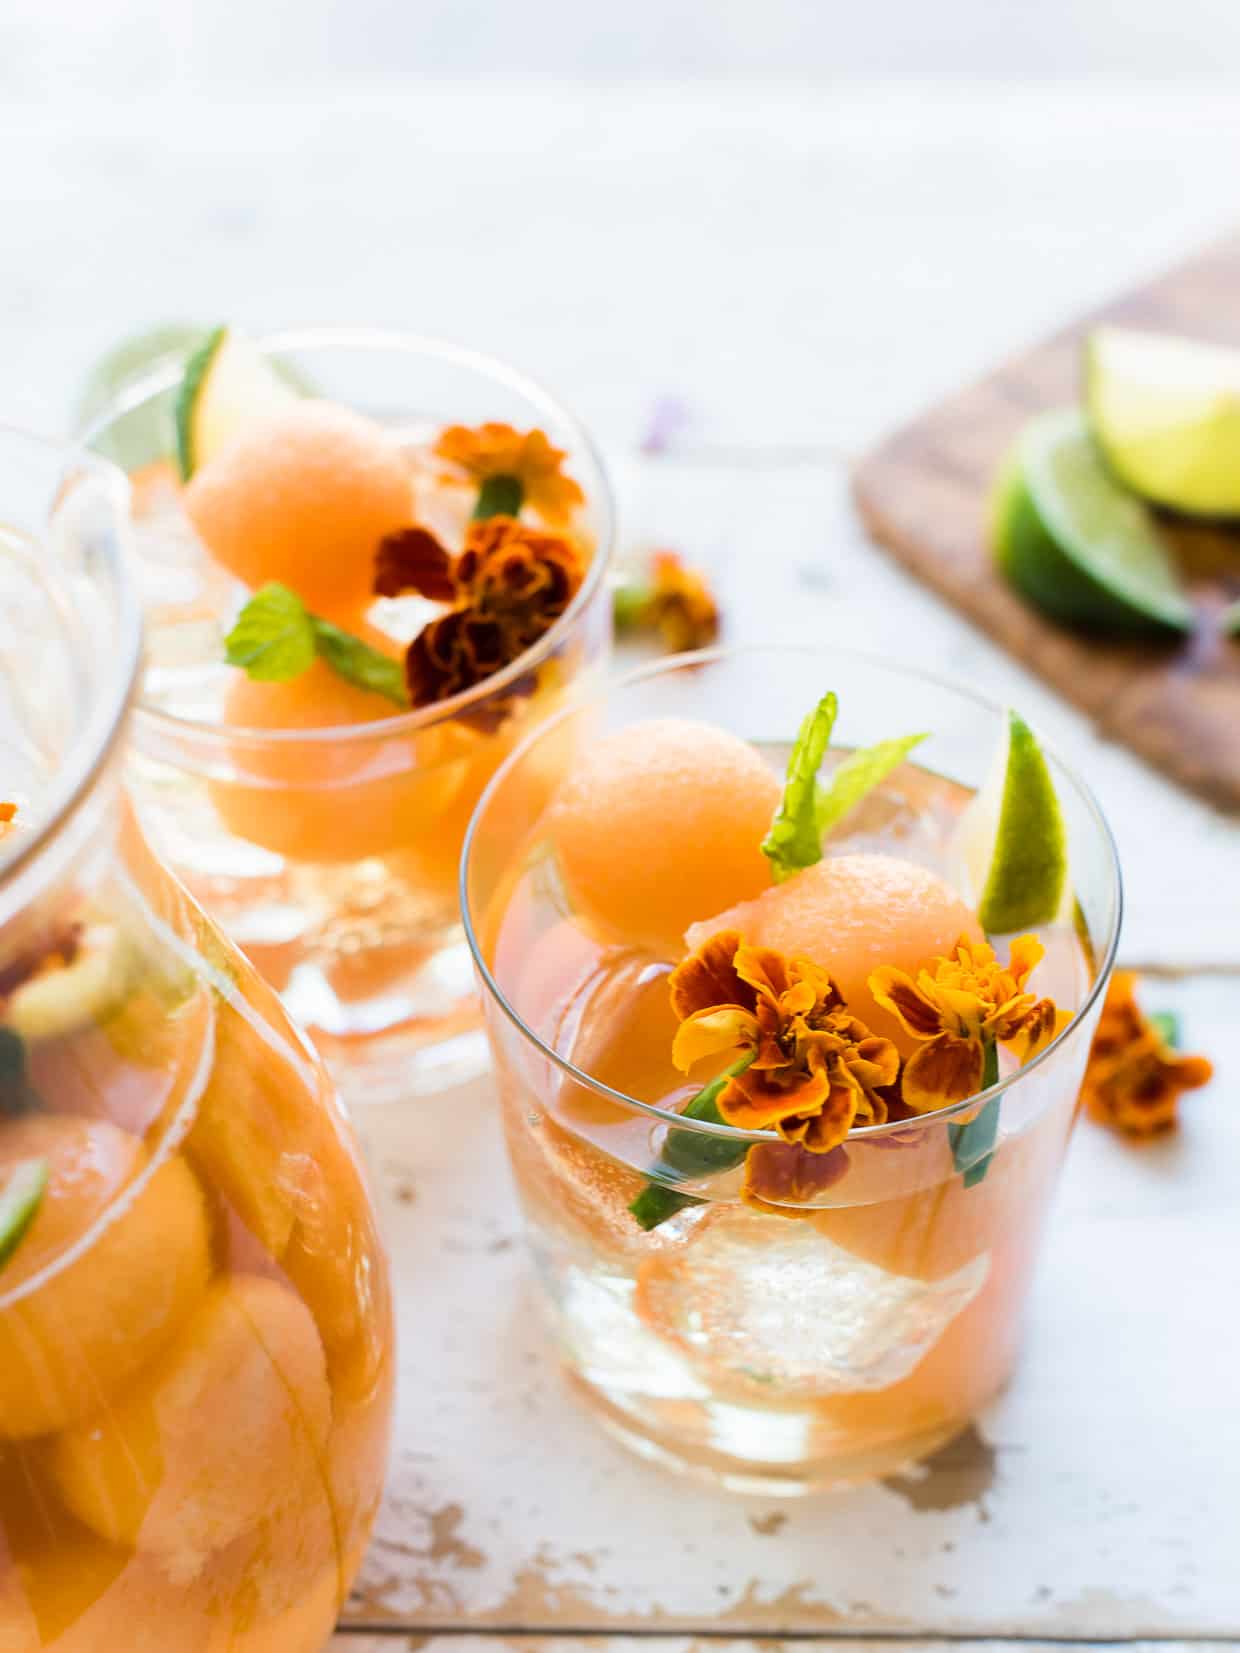 Glasses of Ginger Cantaloupe Sangria garnished with mint and edible flowers